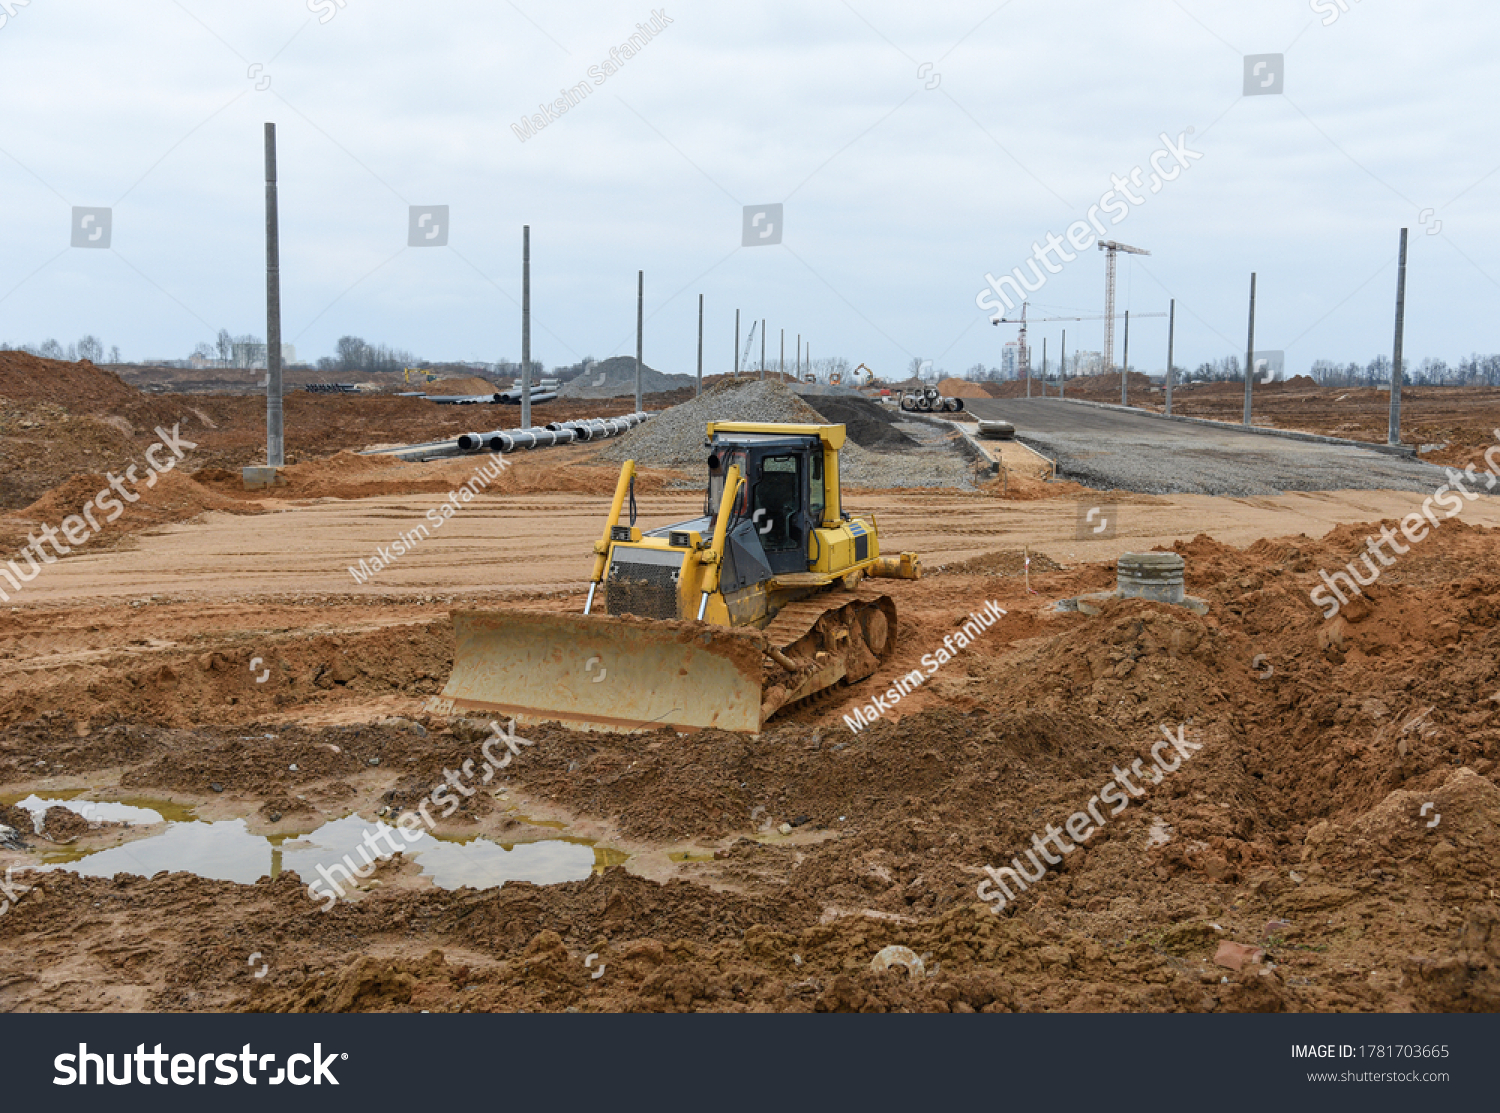 Bulldozer moves gravel during on road work at construction site. Dozer leveling stones for laying asphalt on a new freeway. Heavy machinery for earth-moving #1781703665